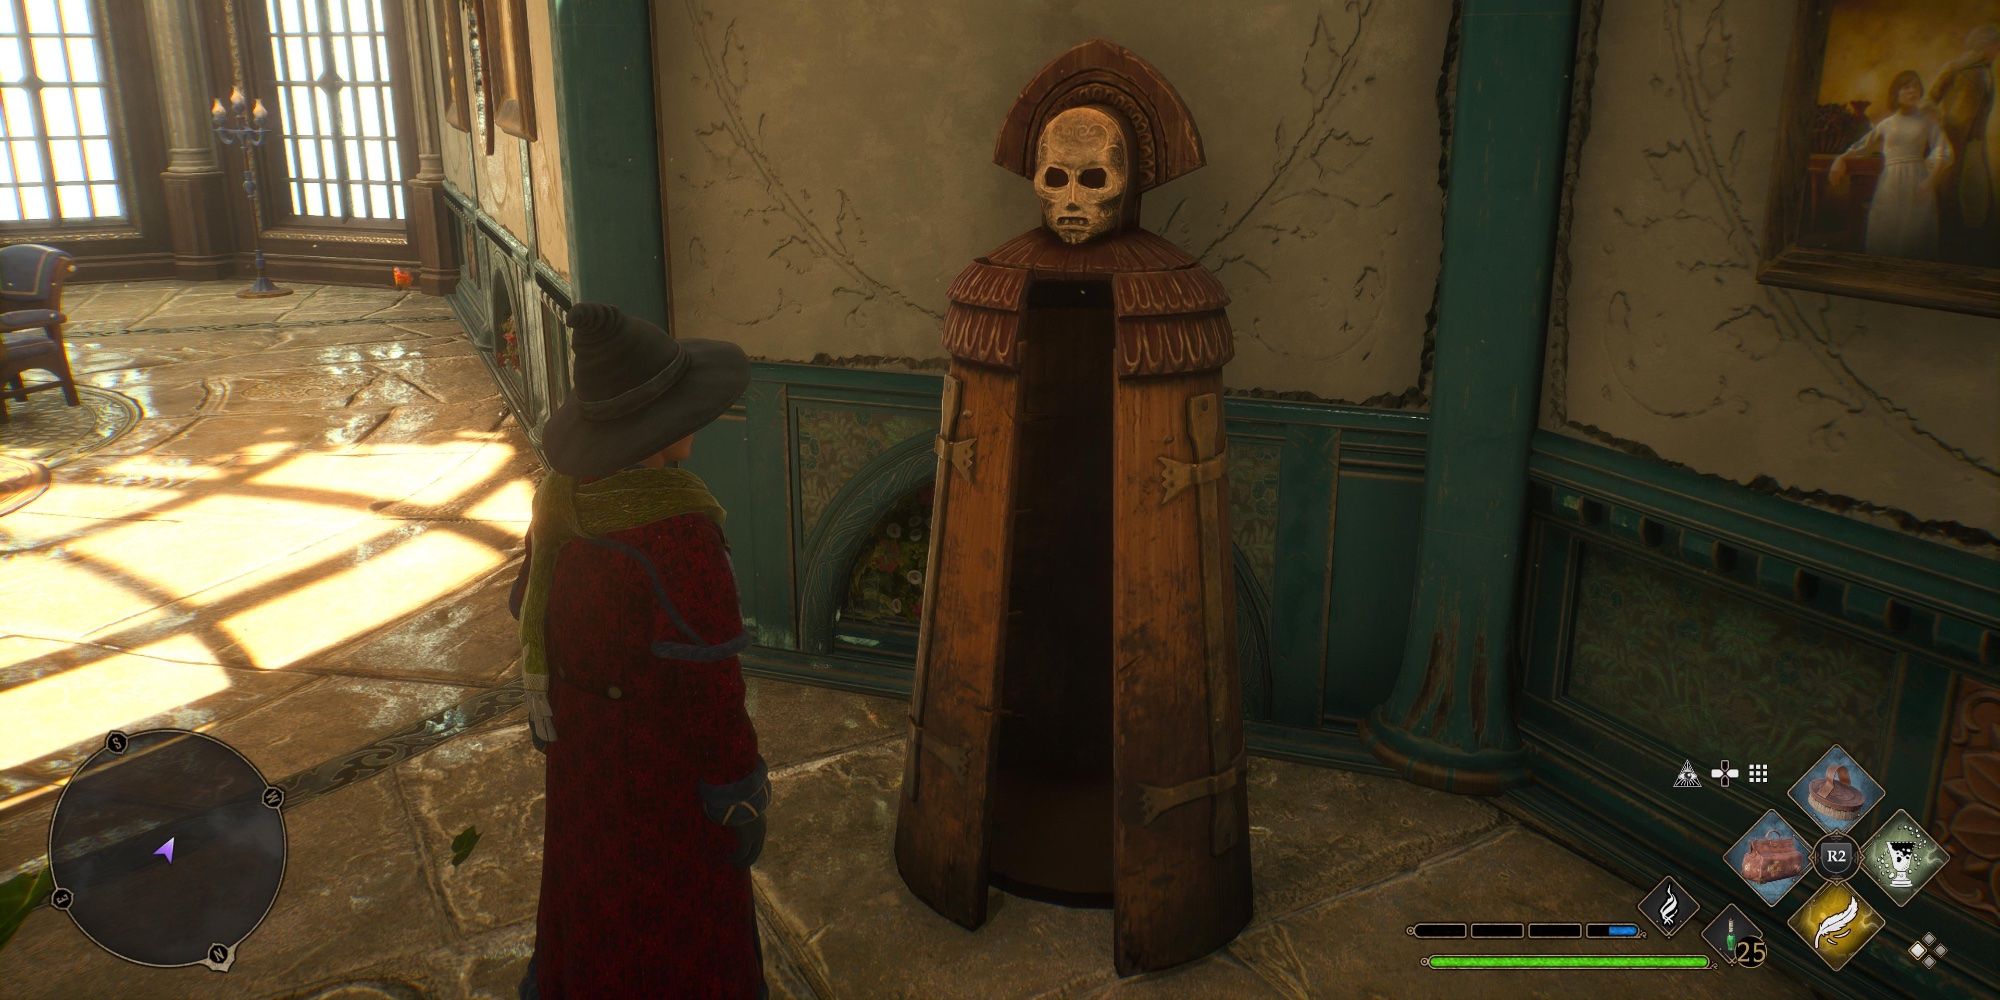 Player looking at a wooden maiden in their room of requirement